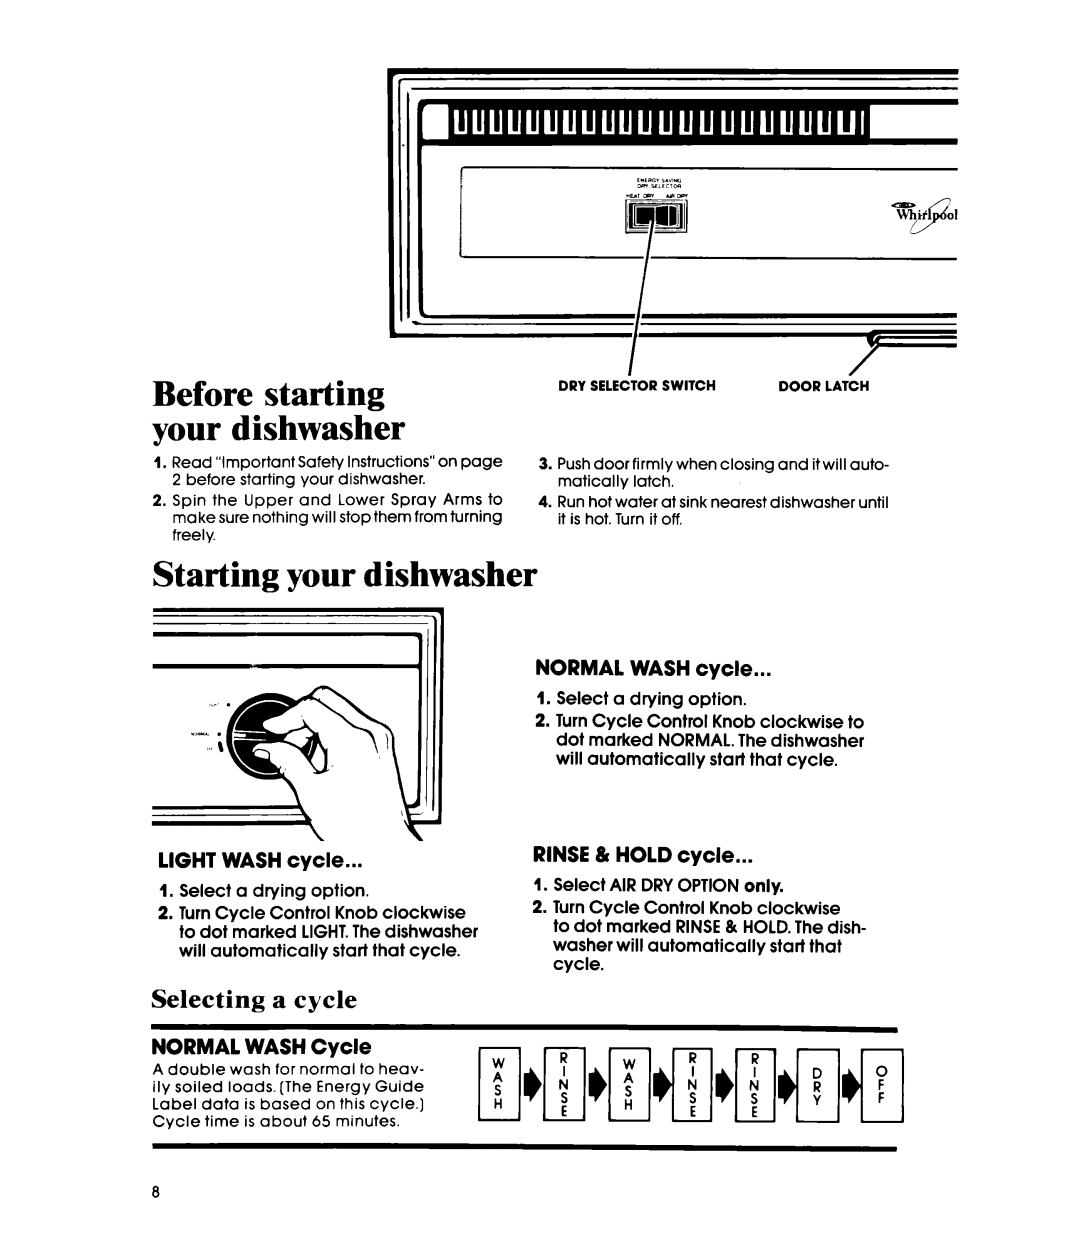 Whirlpool DU1099XT manual Starting your dishwasher, Before starting your dishwasher, Selecting a cycle, NORMAL WASH cycle 